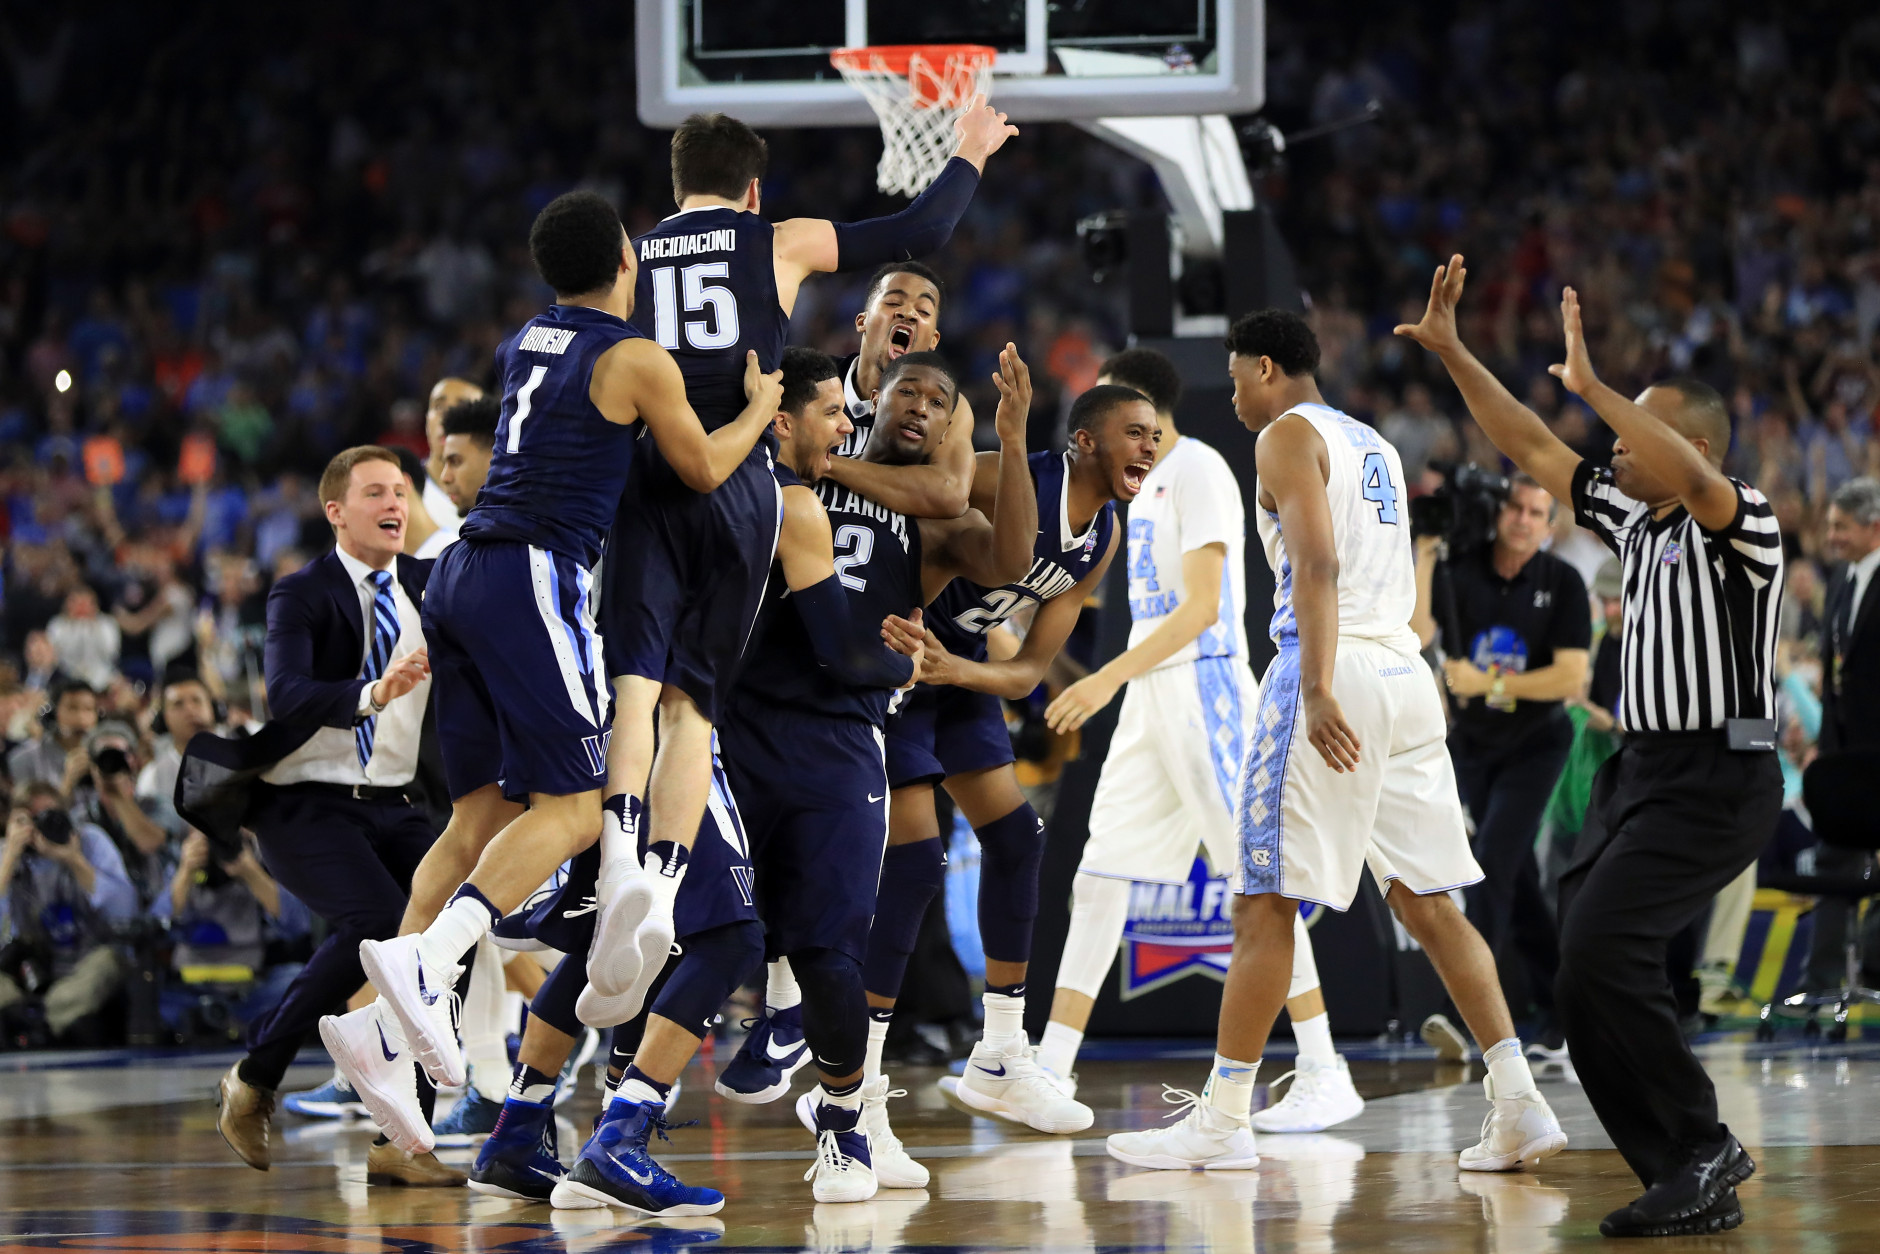 HOUSTON, TEXAS - APRIL 04:  The Villanova Wildcats celebrate defeating the North Carolina Tar Heels 77-74 to win the 2016 NCAA Men's Final Four National Championship game at NRG Stadium on April 4, 2016 in Houston, Texas.  (Photo by Ronald Martinez/Getty Images)